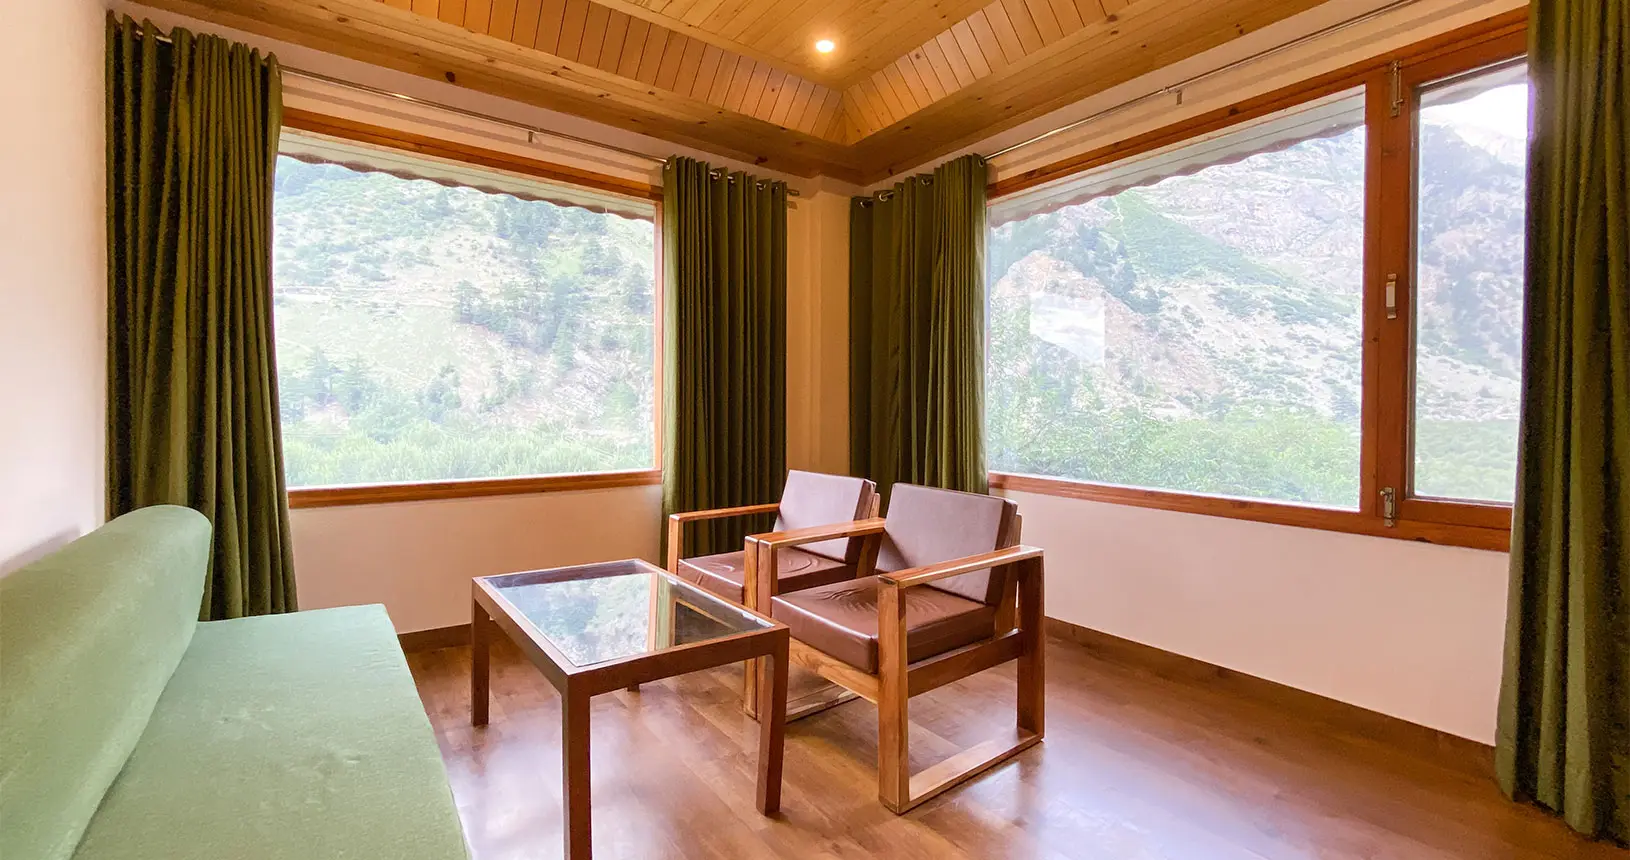 View from seating area in family suite at Hotel Batseri, Sangla.